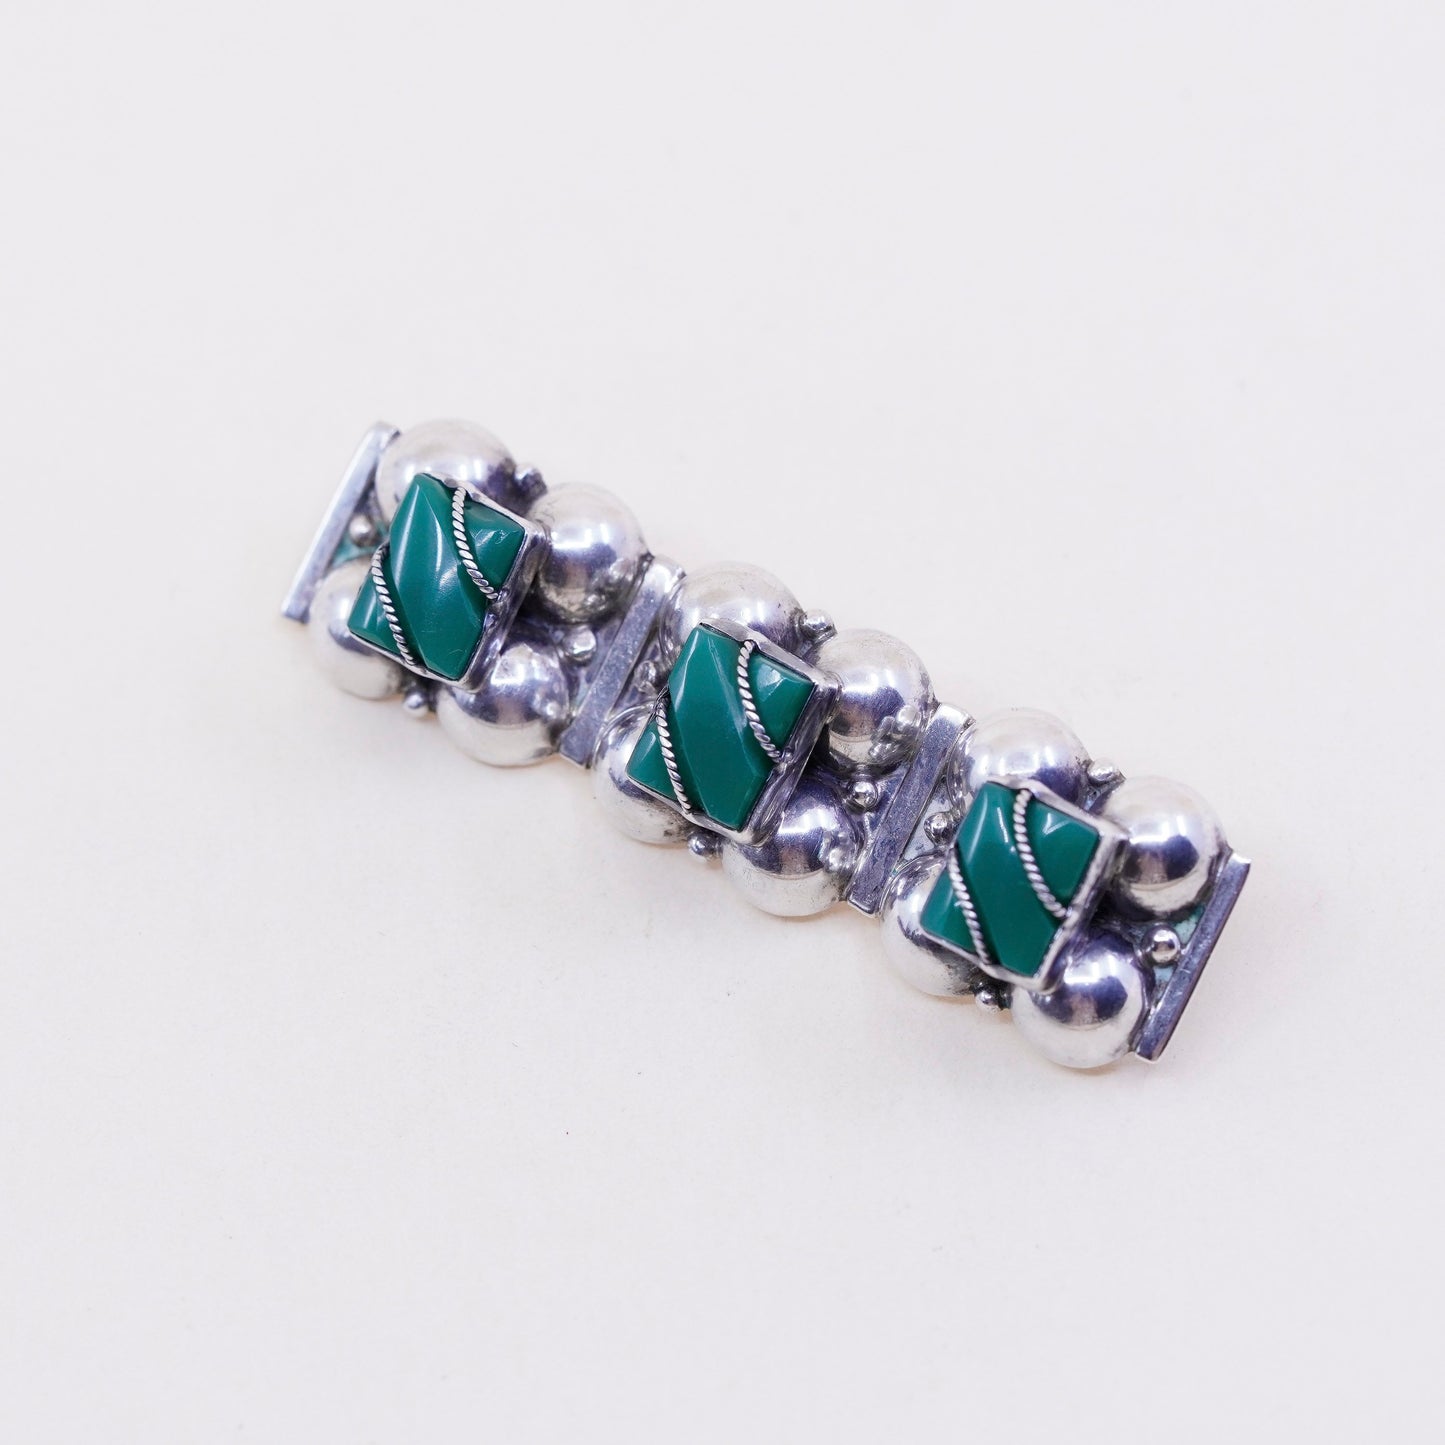 Vintage sterling silver handmade brooch, Mexico 925 pin with jade and beads